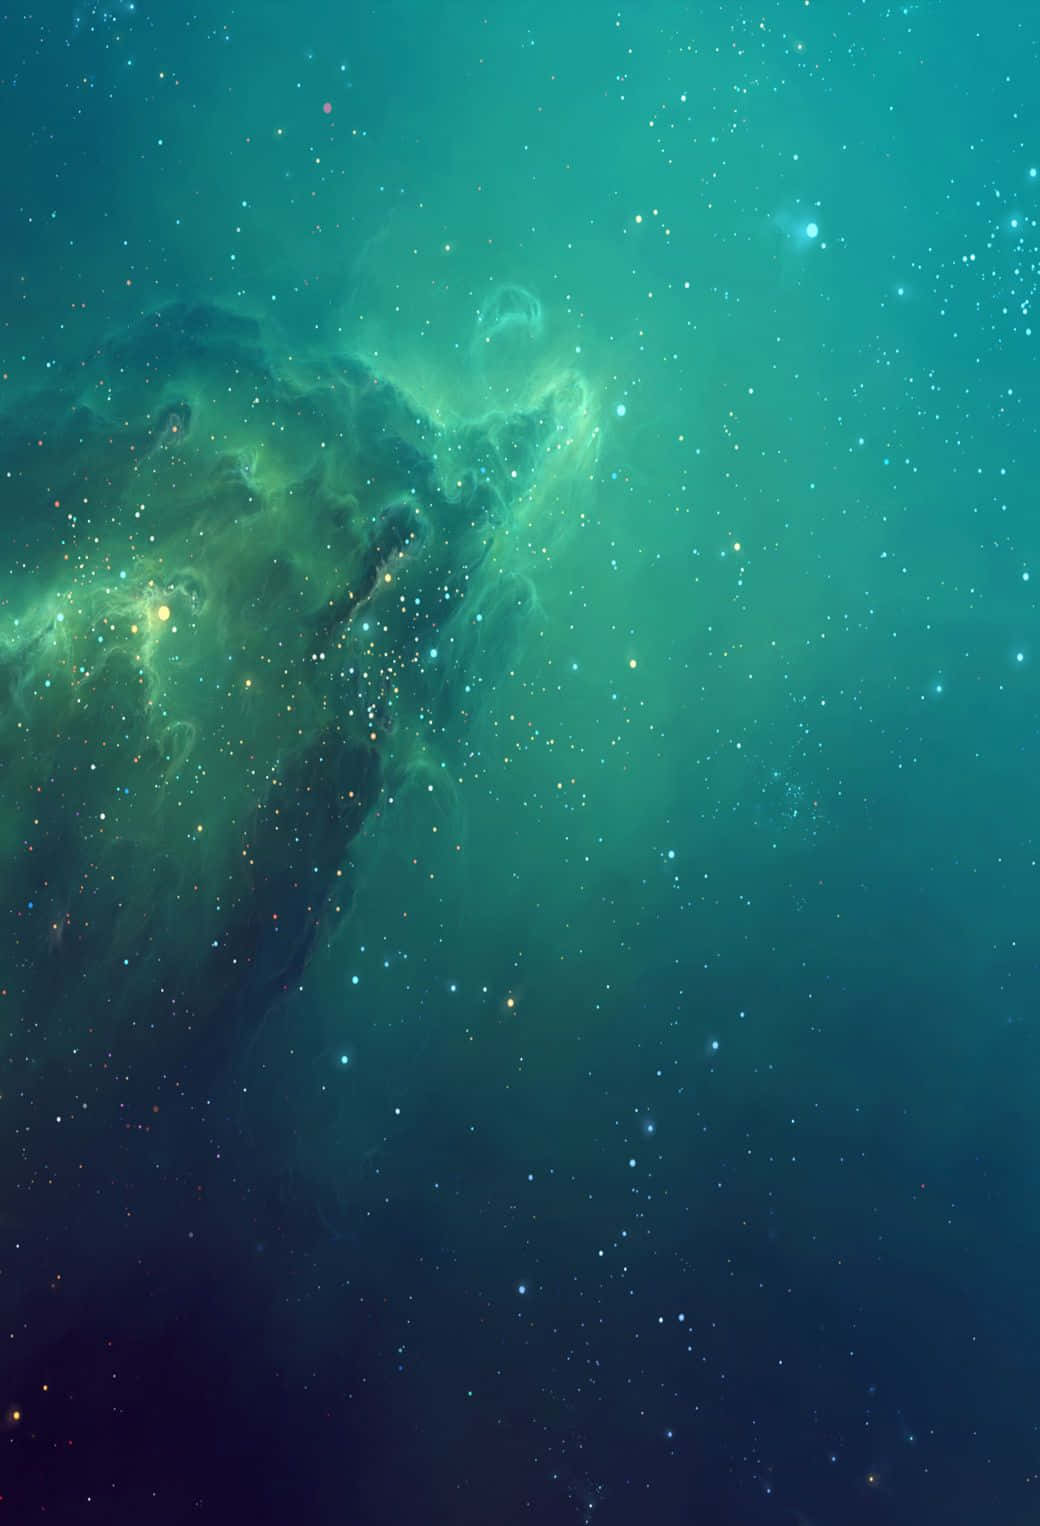 a green nebula in space with stars Wallpaper